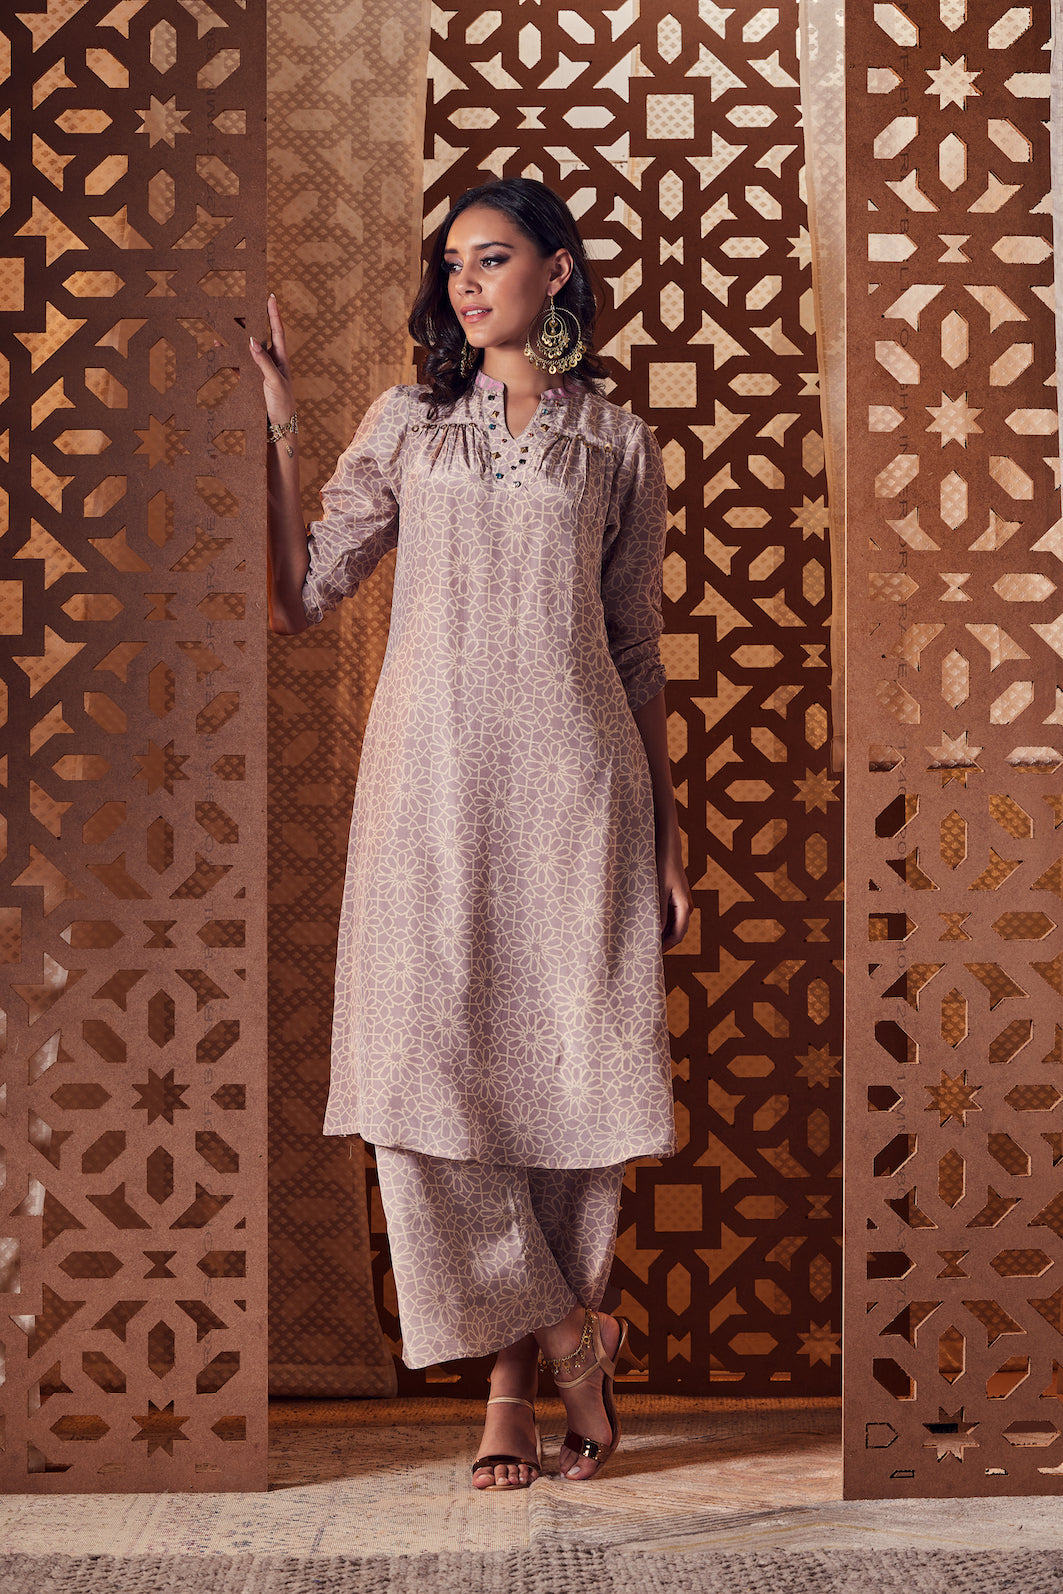 Beige A-Line Kurta - Set of 3 at Kamakhyaa by Charkhee. This item is Beige, Cotton, Crepe, Embroidered, Ethnic Wear, Indian Wear, Kurta Palazzo Sets, Naayaab, Natural, Nayaab, Relaxed Fit, Womenswear